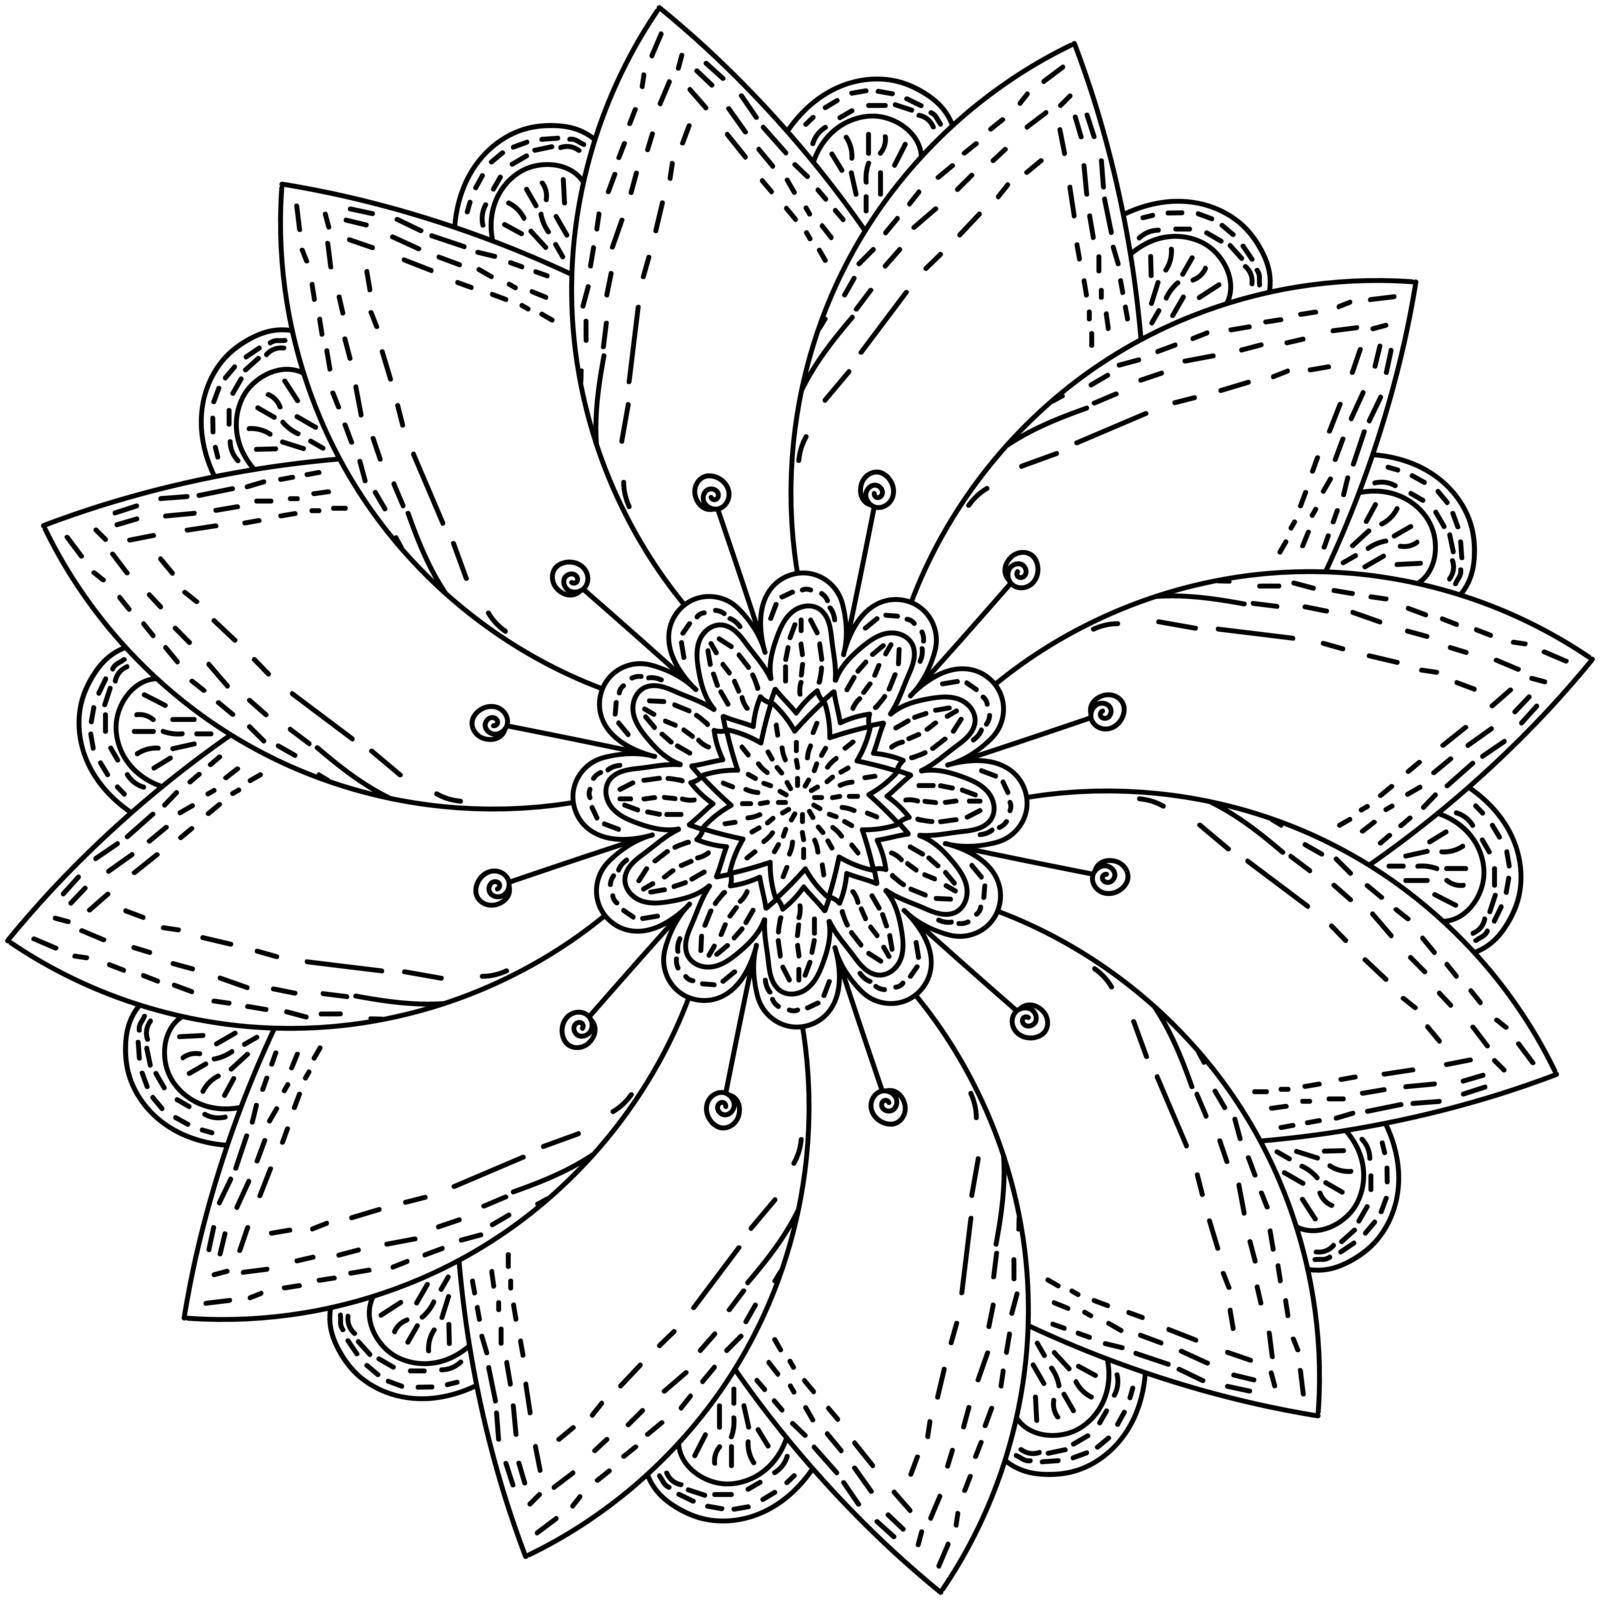 Mandala flower with small shading in the center and along the edge of the petals, zen coloring page for children and adults illustration